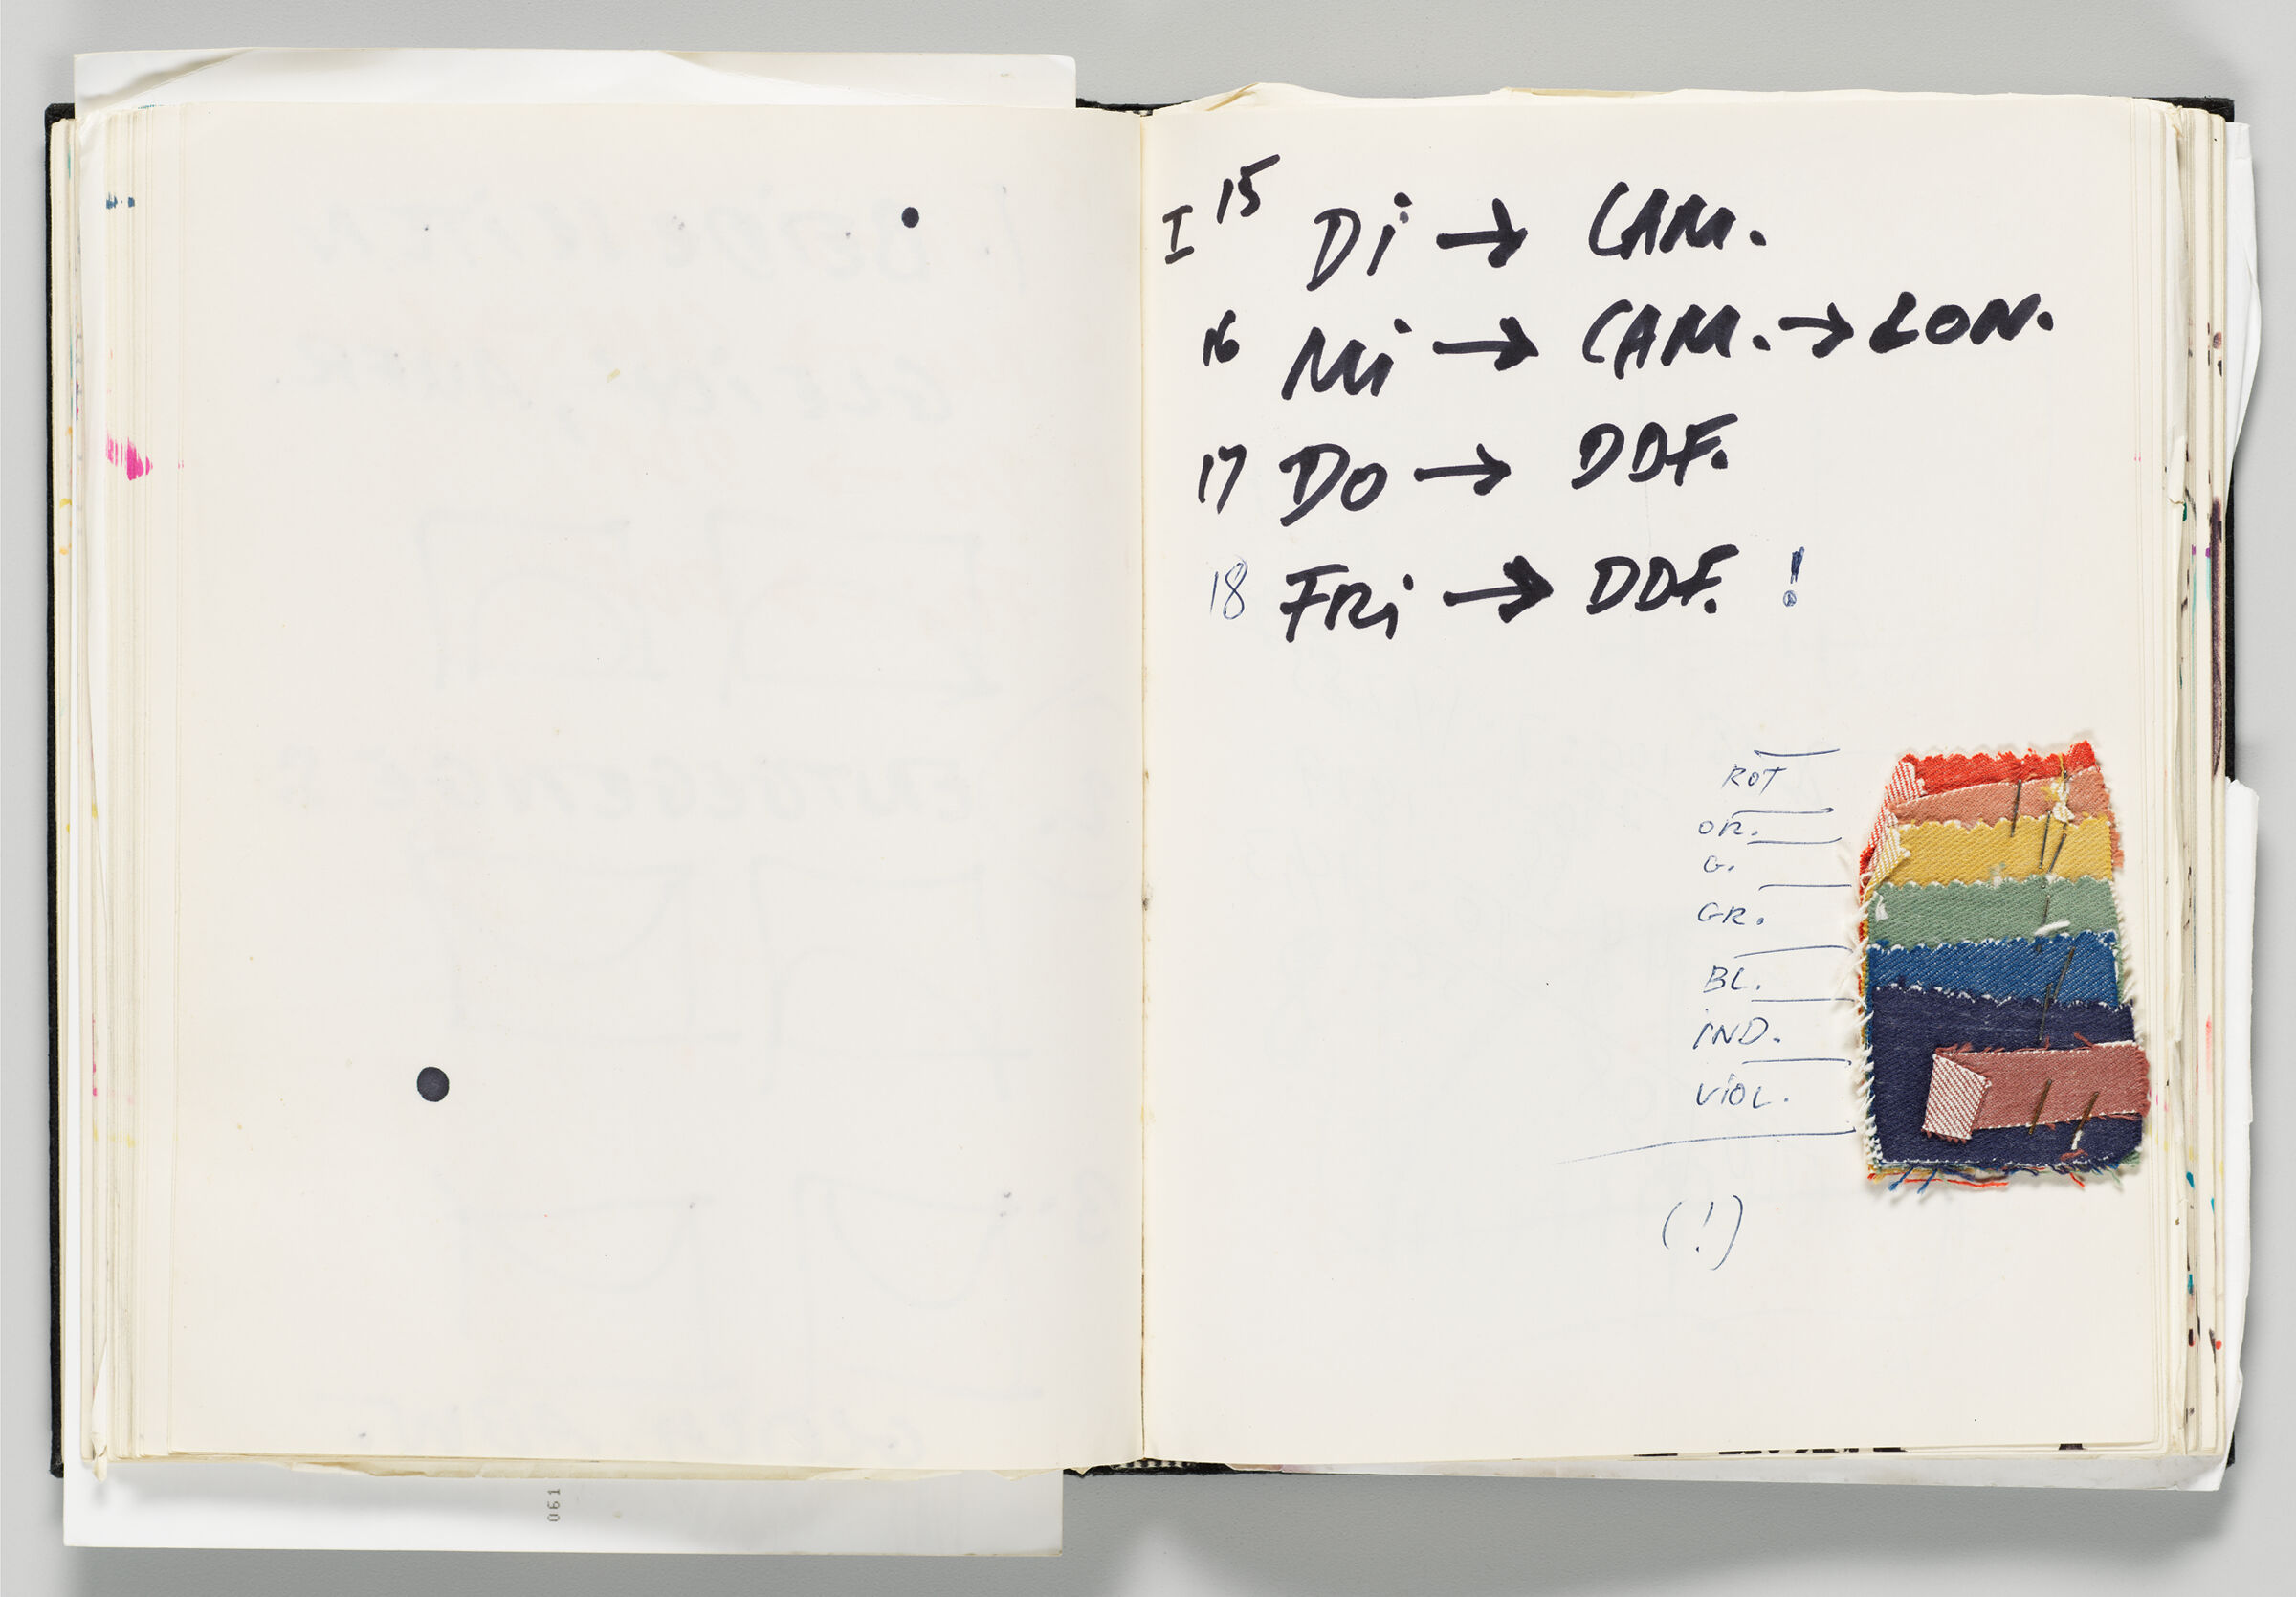 Untitled (Blank With Faint Color Transfer, Left Page); Untitled (Notes And Rainbow-Colored Fabric Swatches, Right Page)